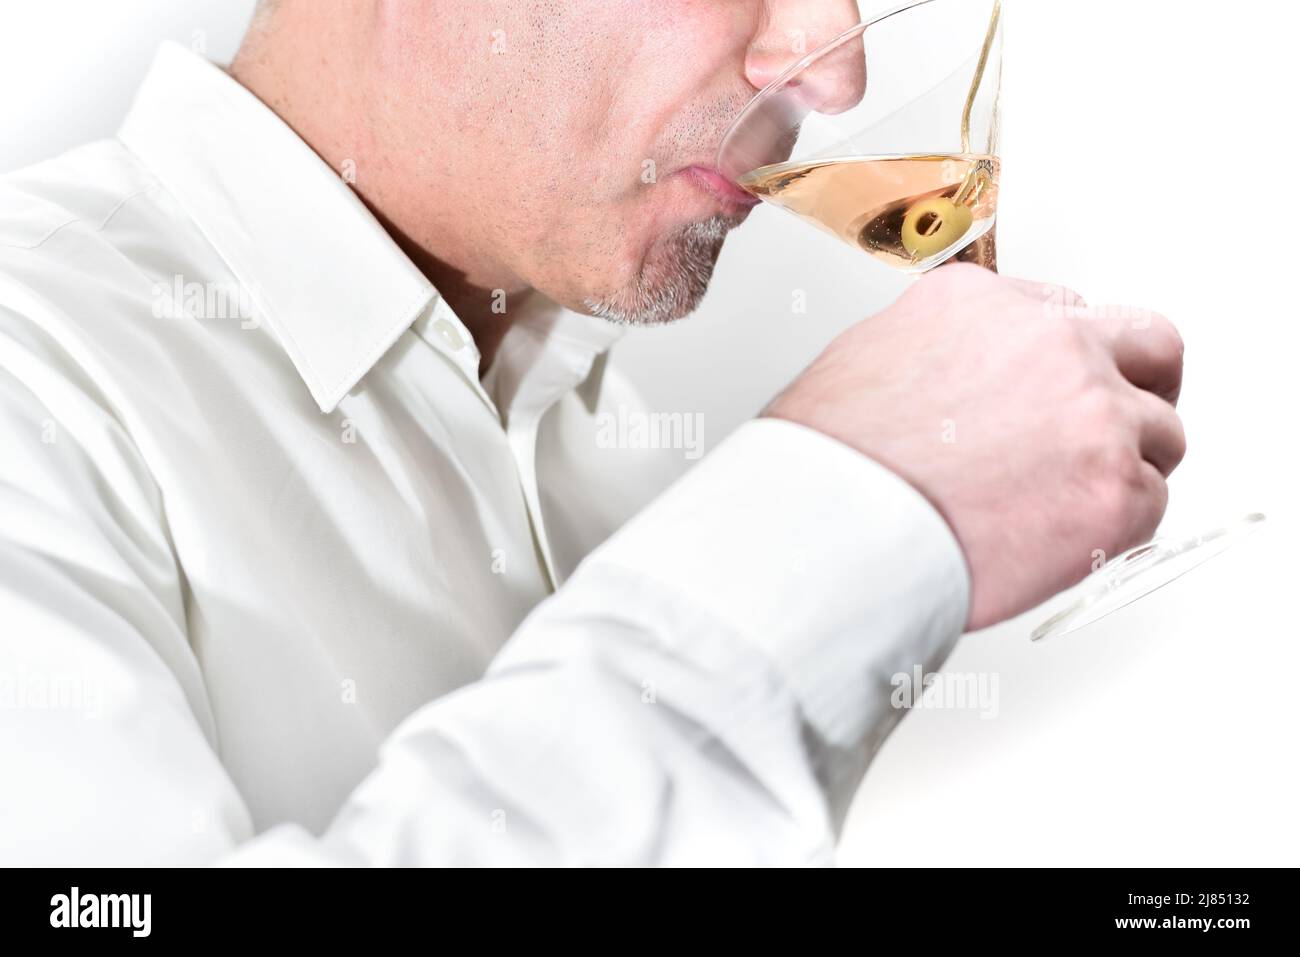 Close-up of a man tasting and drinking martini cocktail with olives. Stock Photo